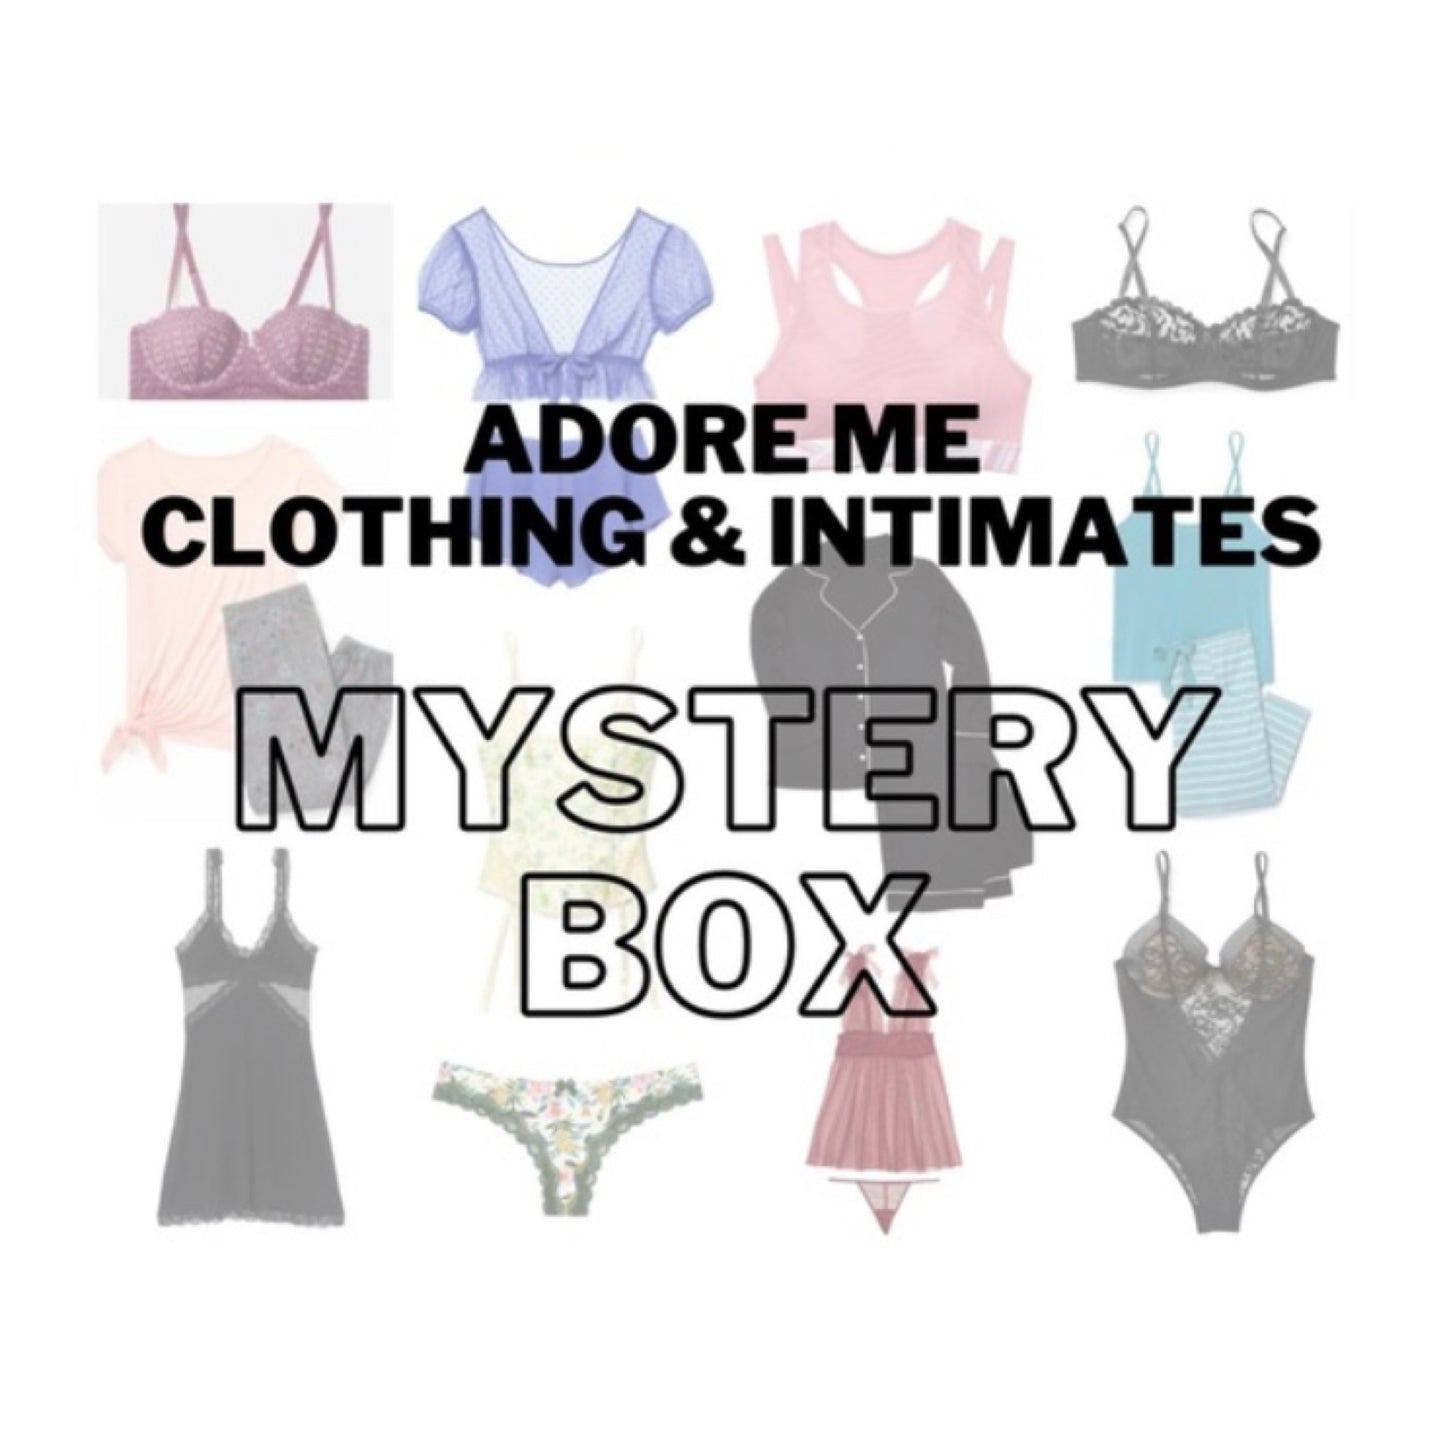 Adore Me Intimates & Clothing Mystery Box Resellers